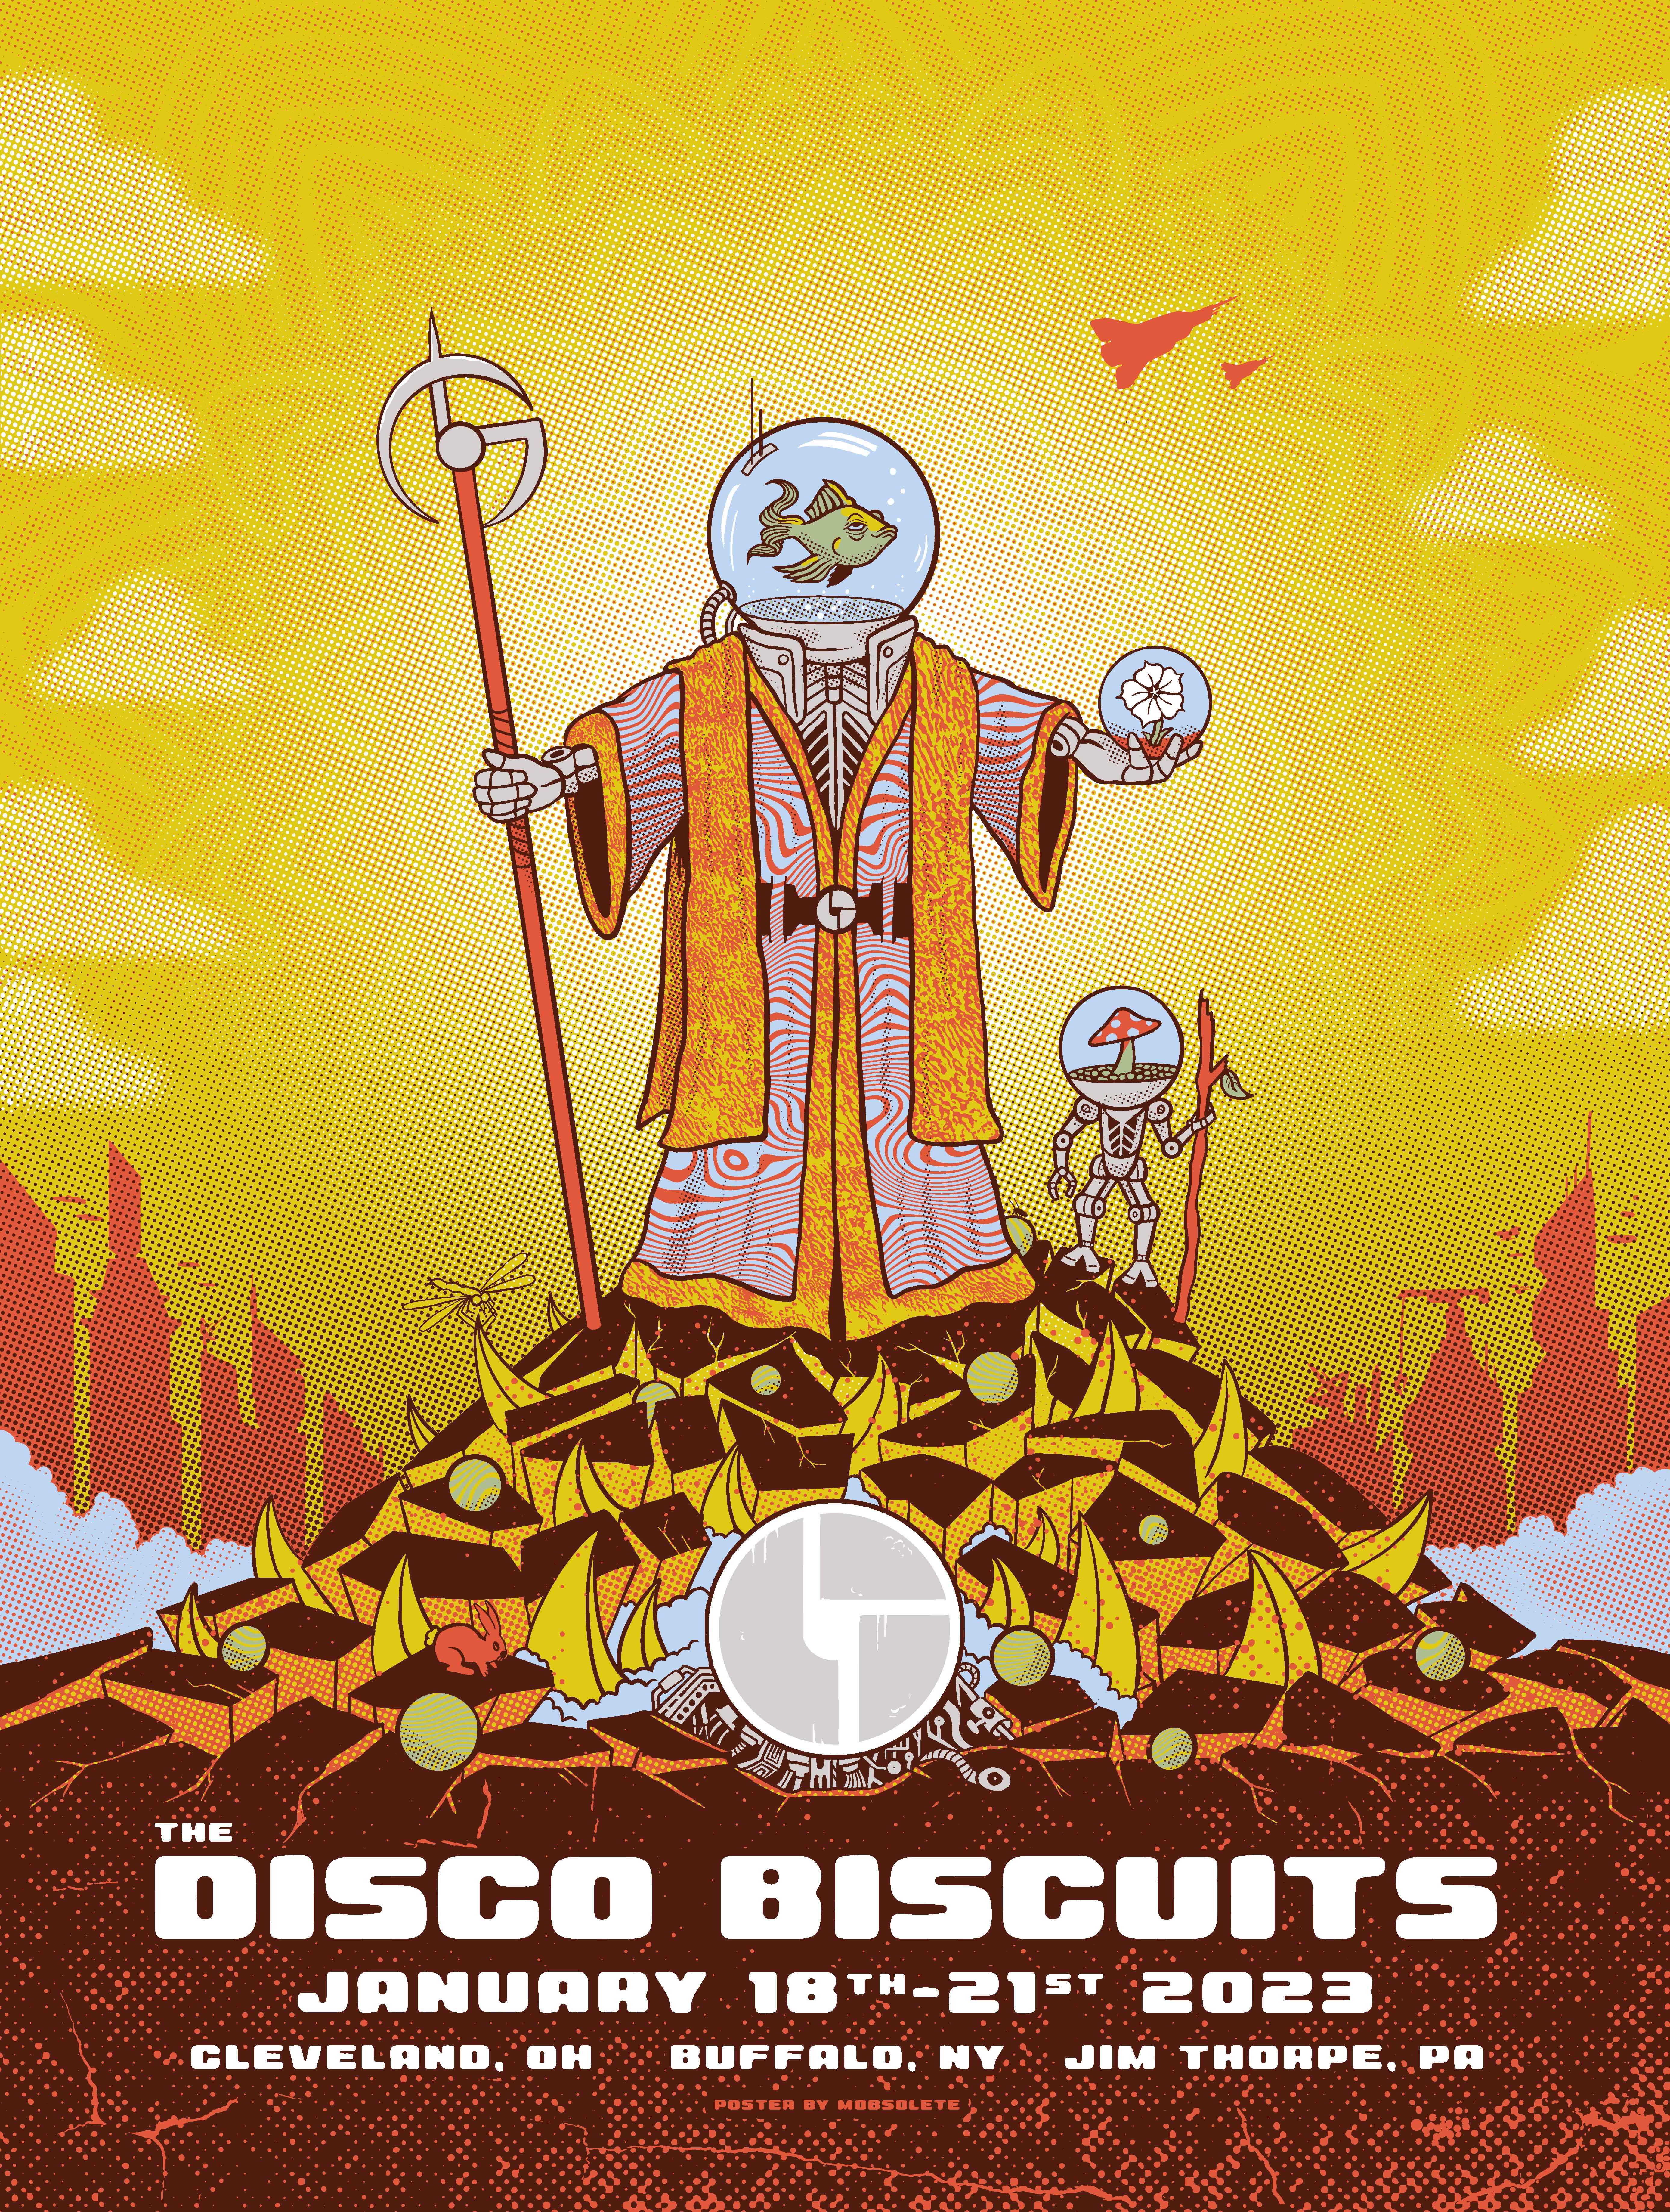 Disco Biscuits January 18-21 2023 by Mobsolete